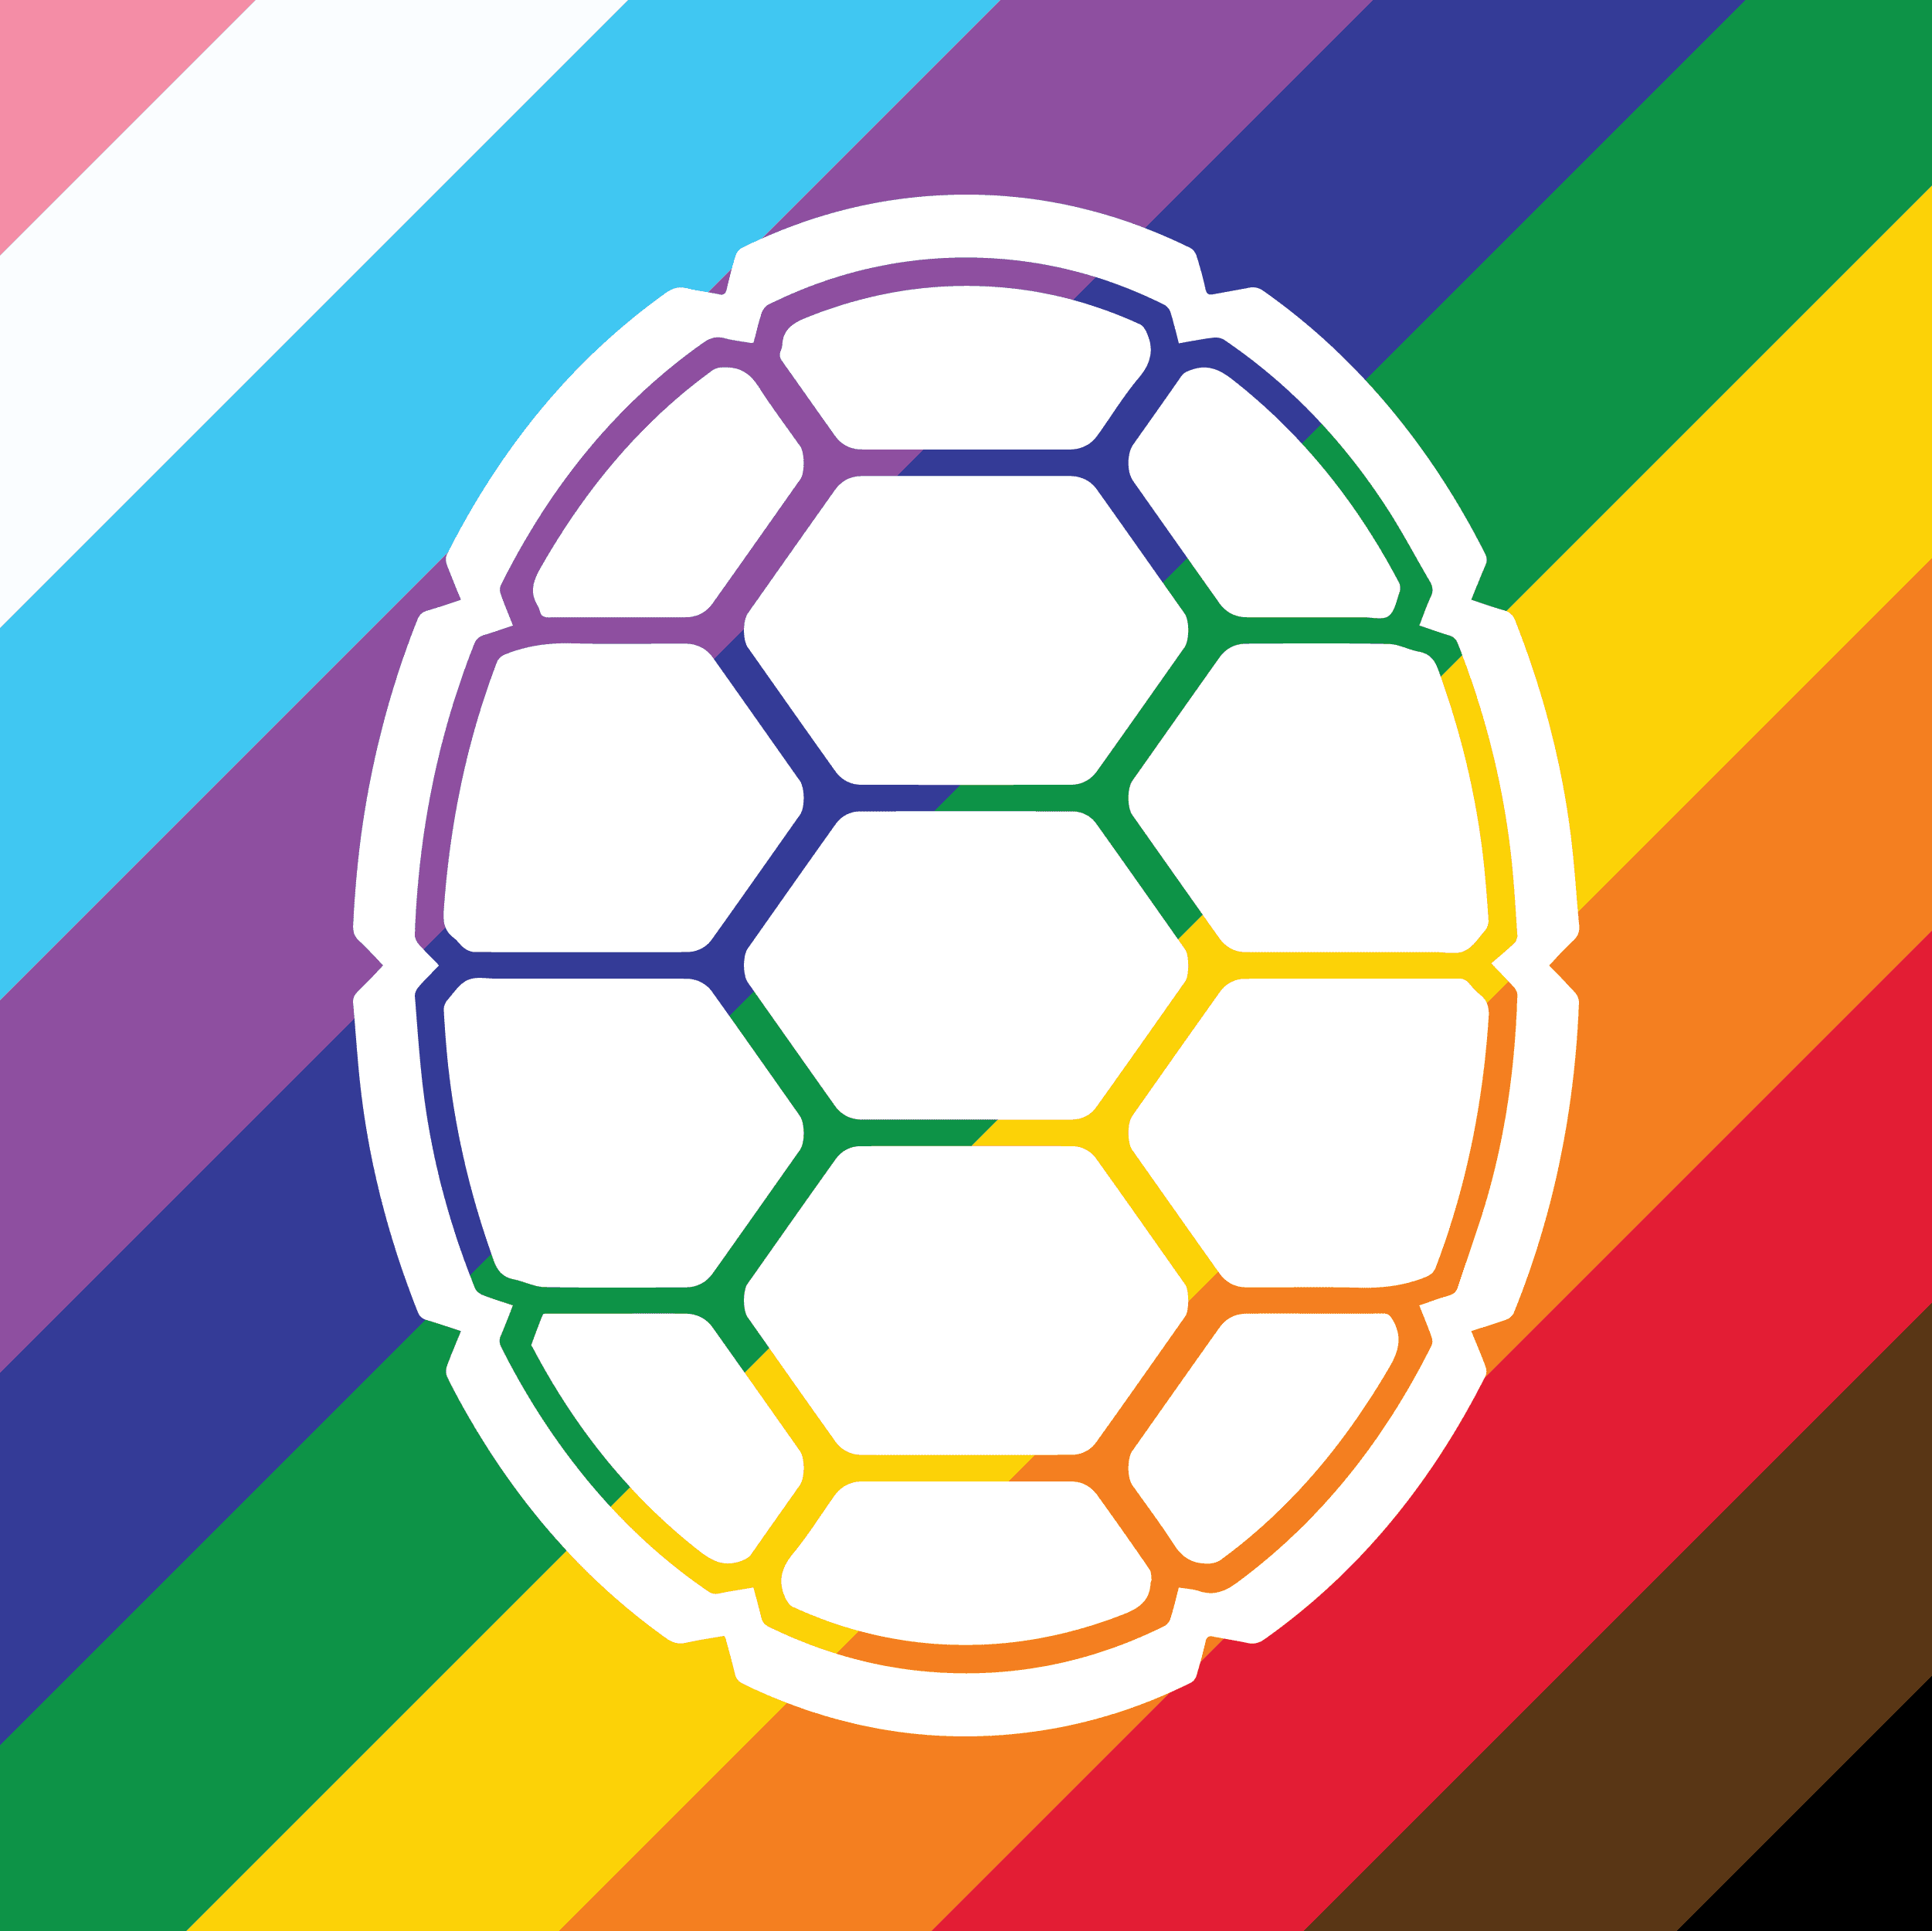 Terp shell with the background of the LGBTQ+ flag colors